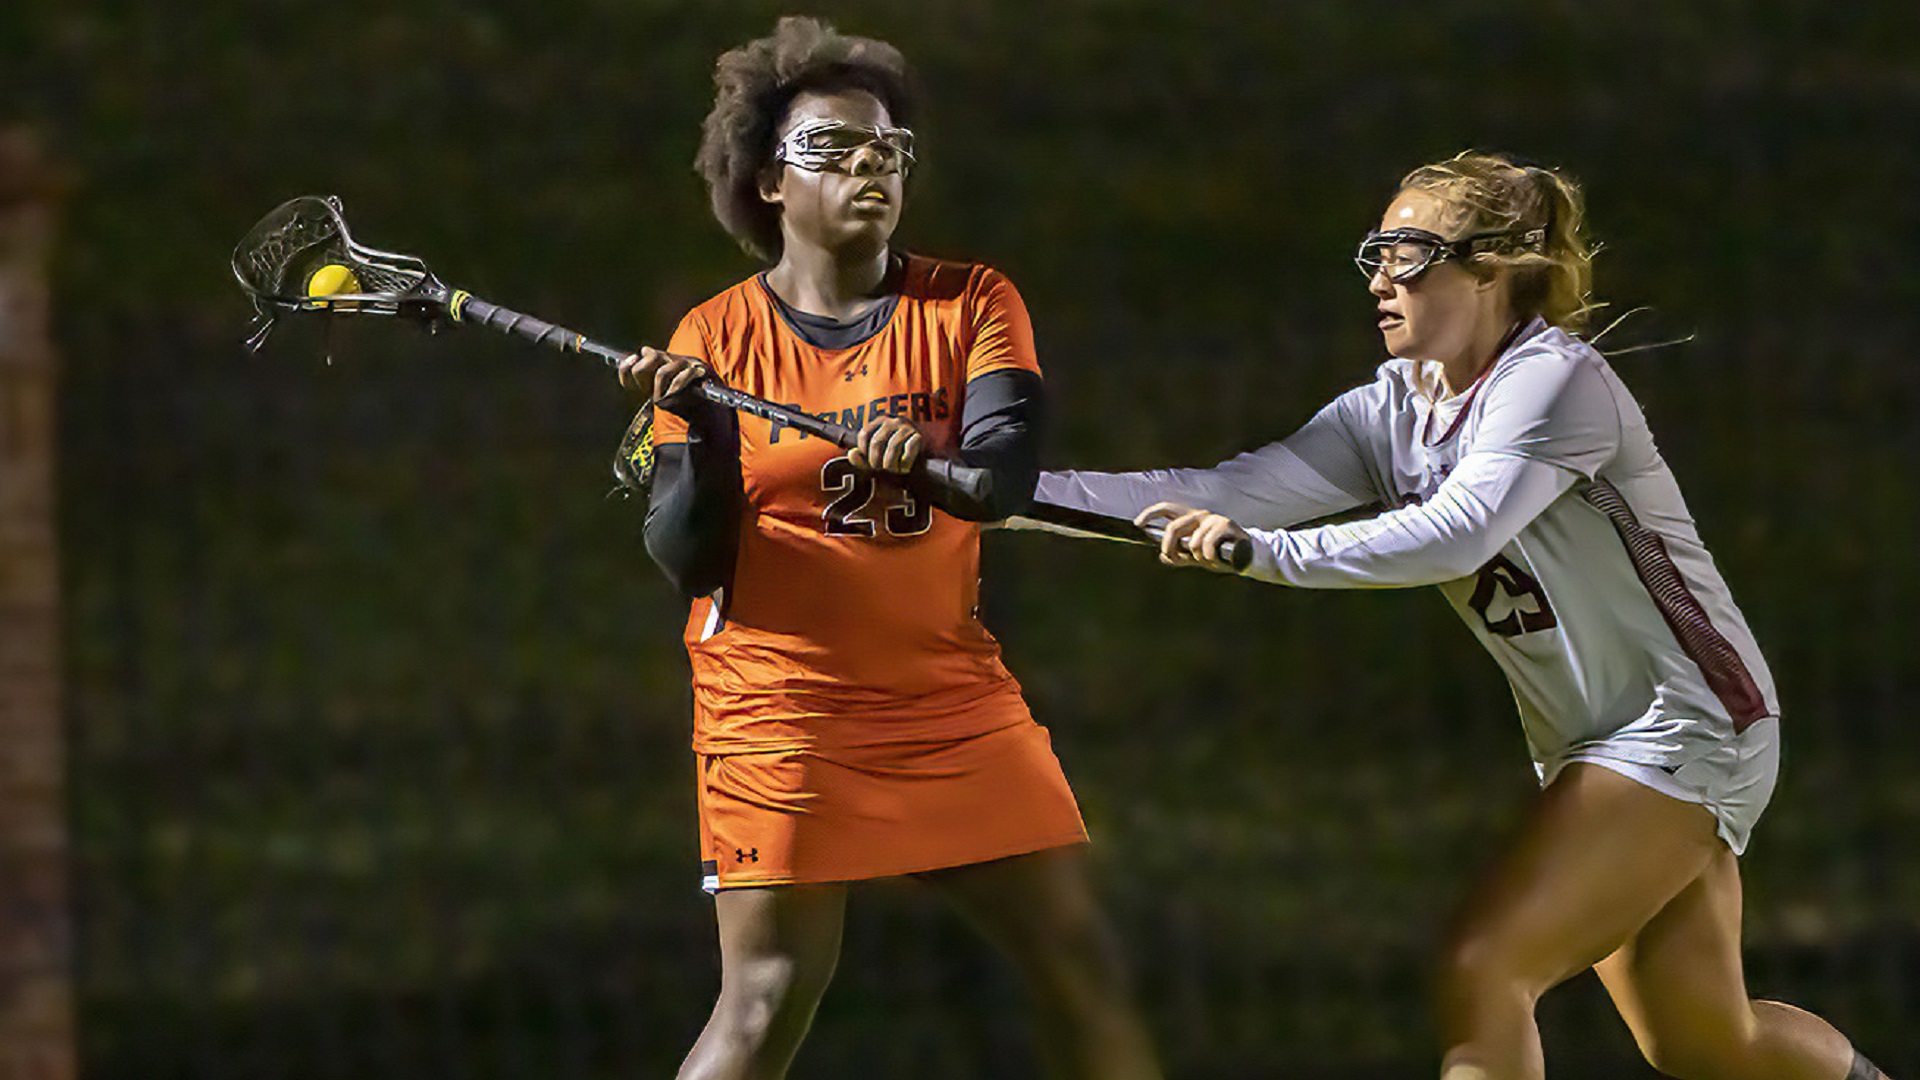 Kamryn McNeil scored her fifth goal of the season against Florida Tech (photo by Chuck Williams)